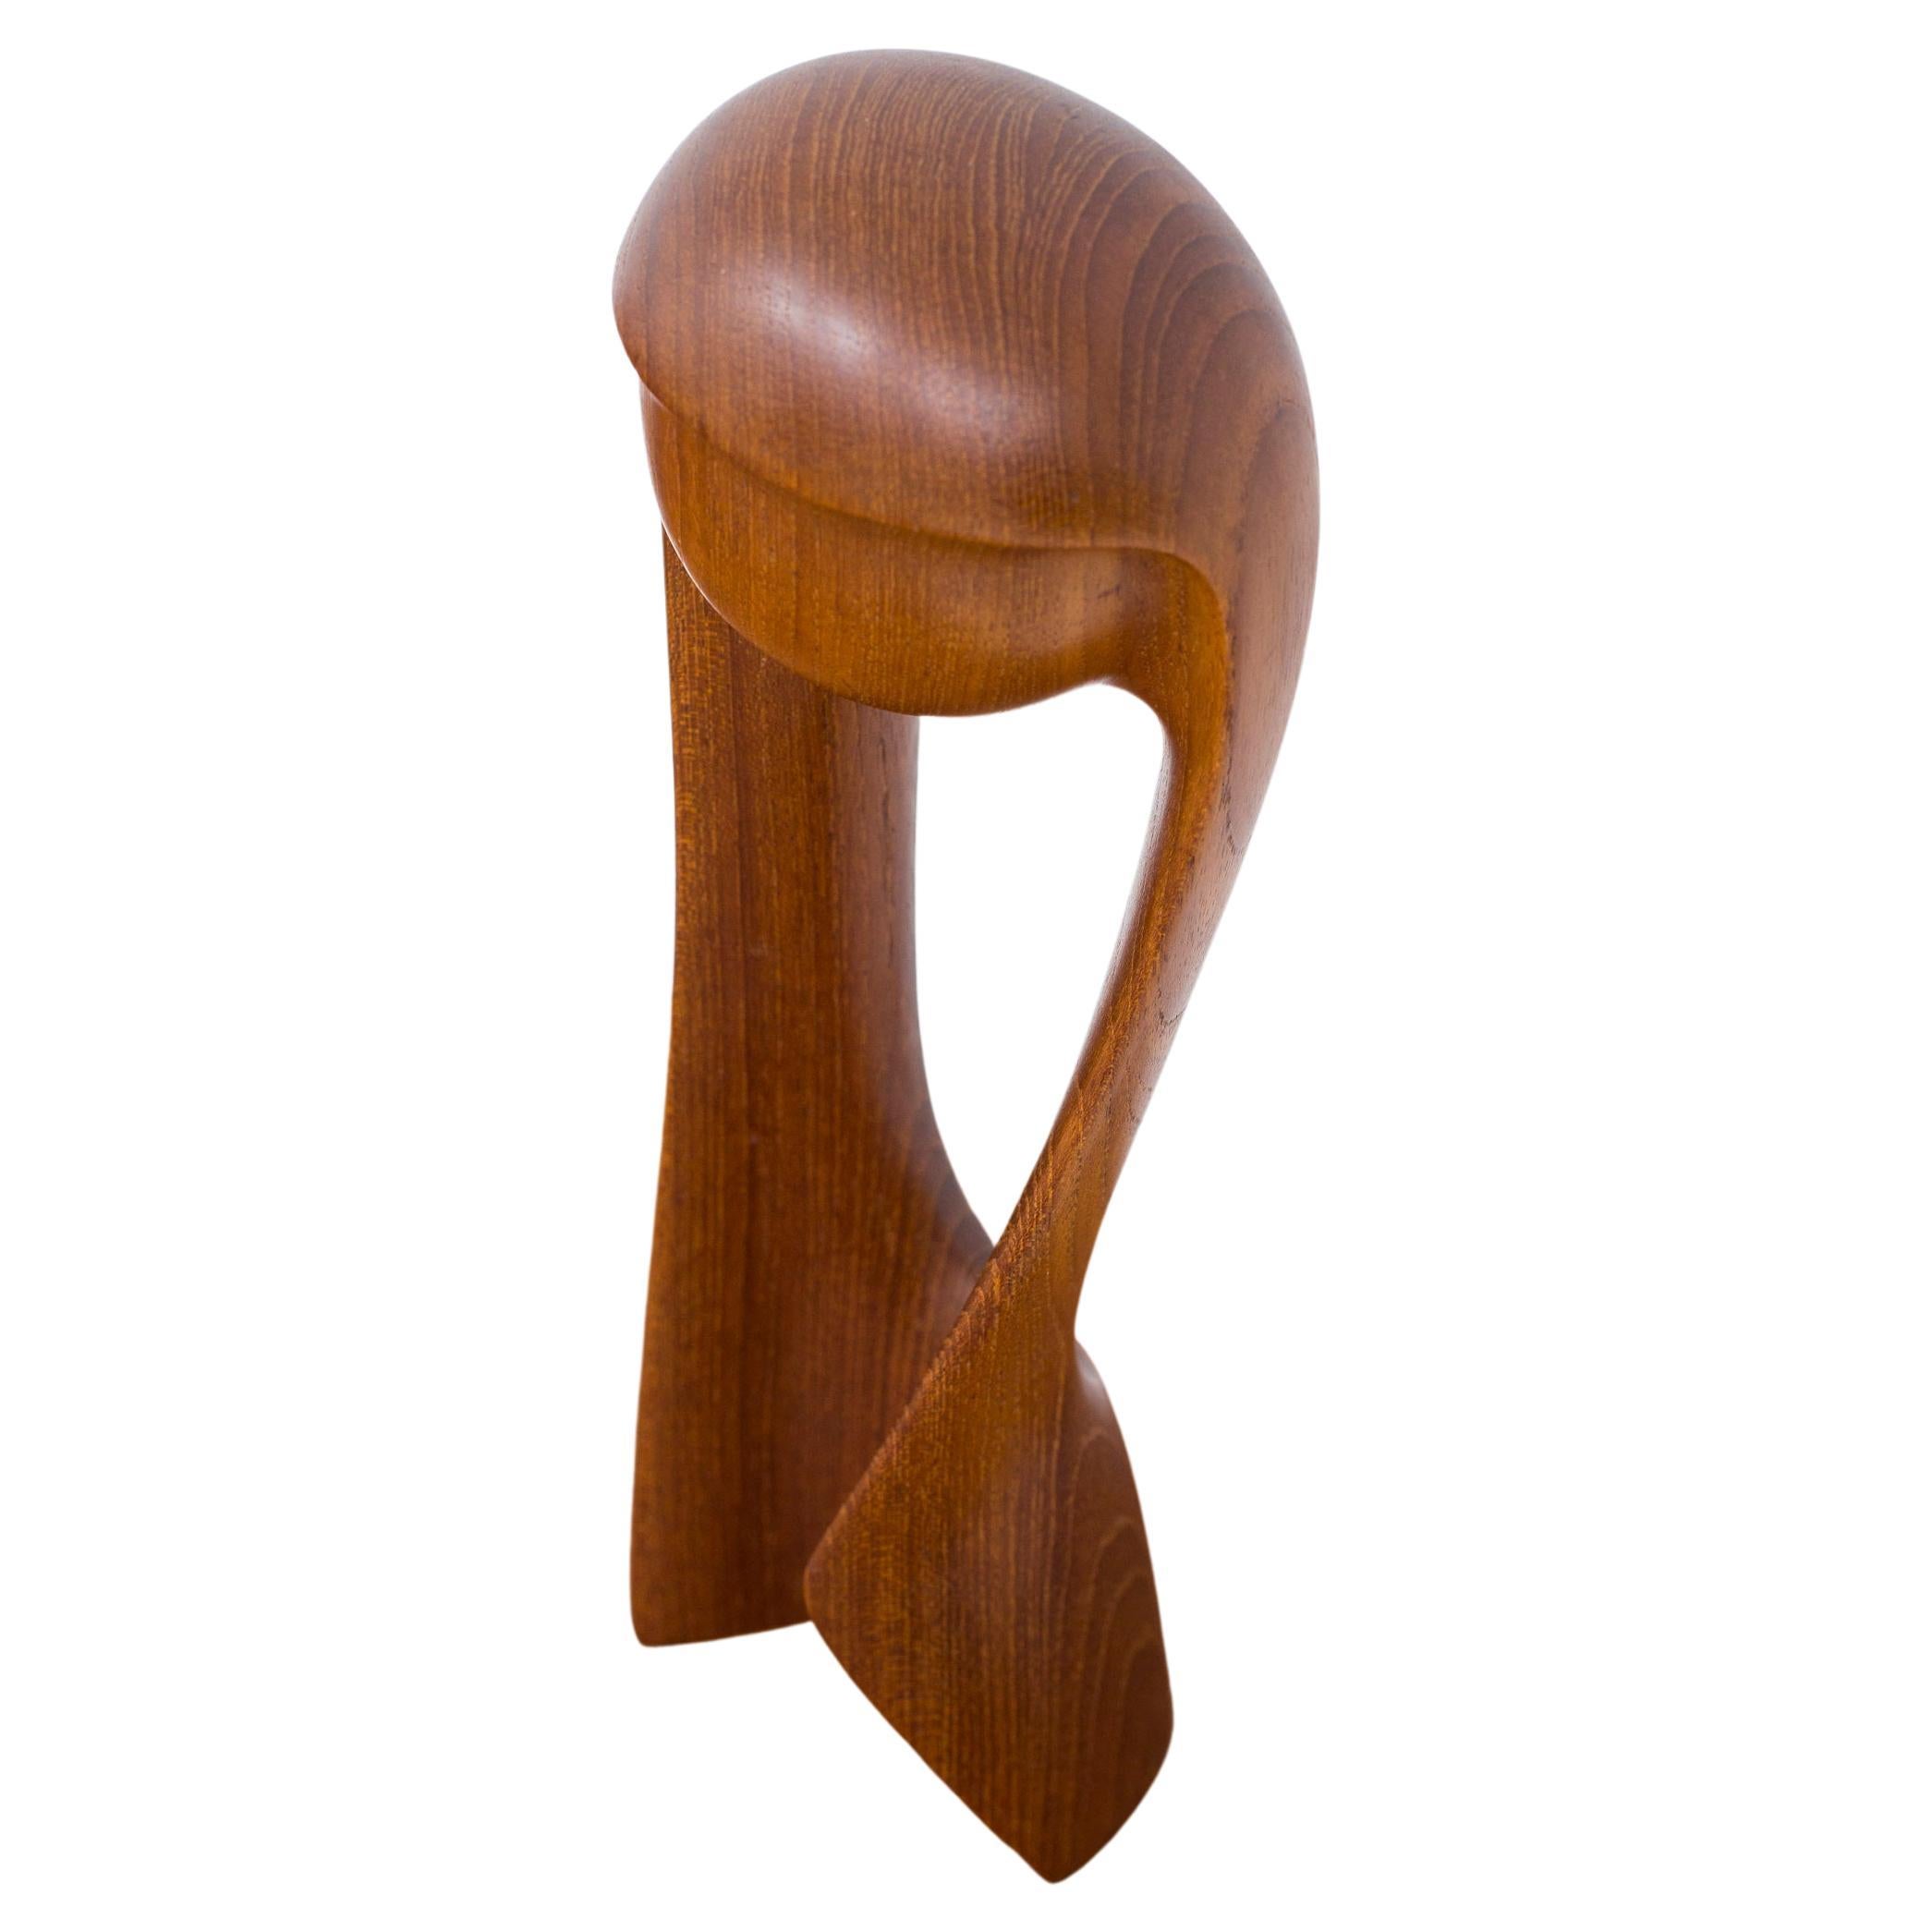 Teak Sculpture by Simon Randers, Produced in Denmark During the, 1950s For Sale